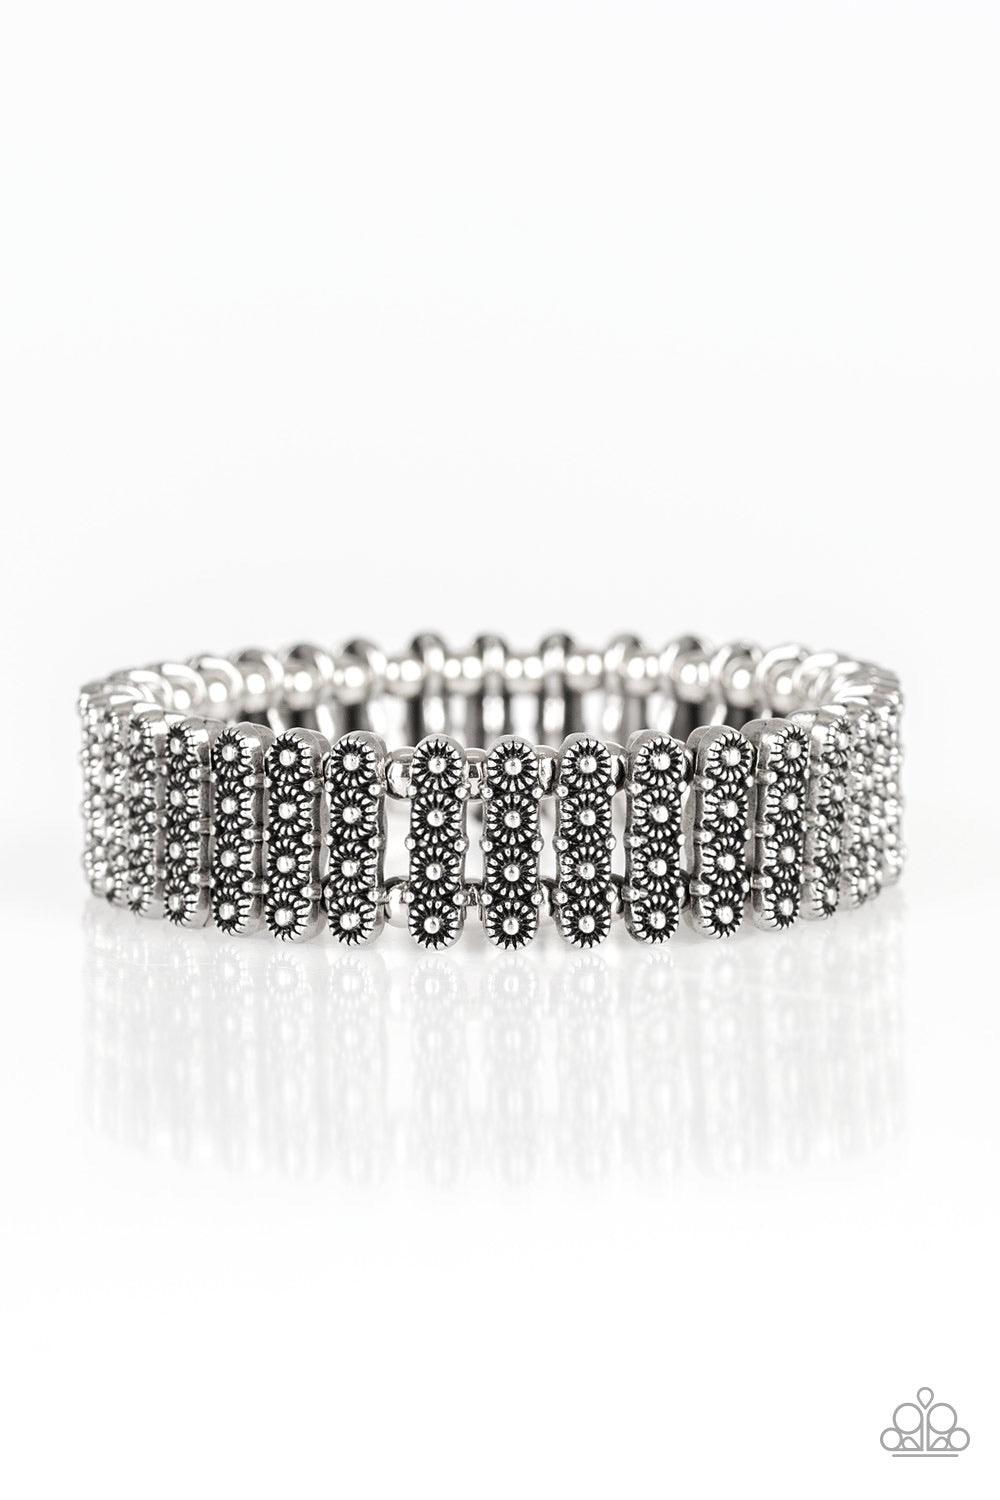 Paparazzi Accessories Rise With The Sun - Silver Dainty silver beads and stacked silver frames radiating with sunburst patterns are threaded along stretchy bands around the wrist for a whimsical look. Jewelry